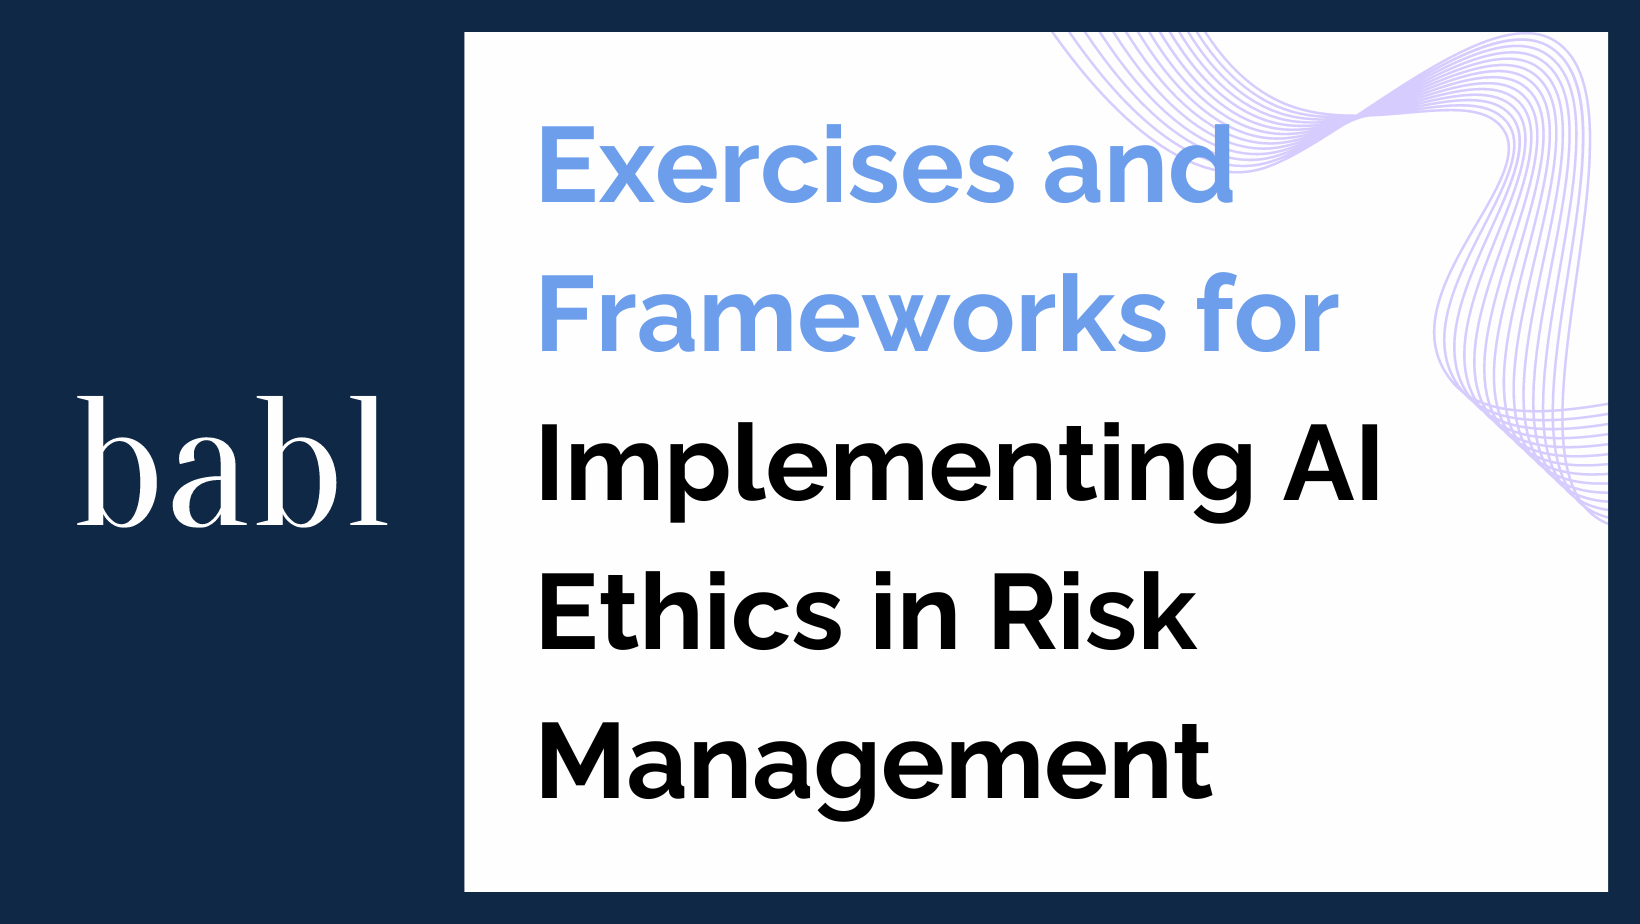 Exercises and Frameworks for Implementing AI Ethics in Risk Management